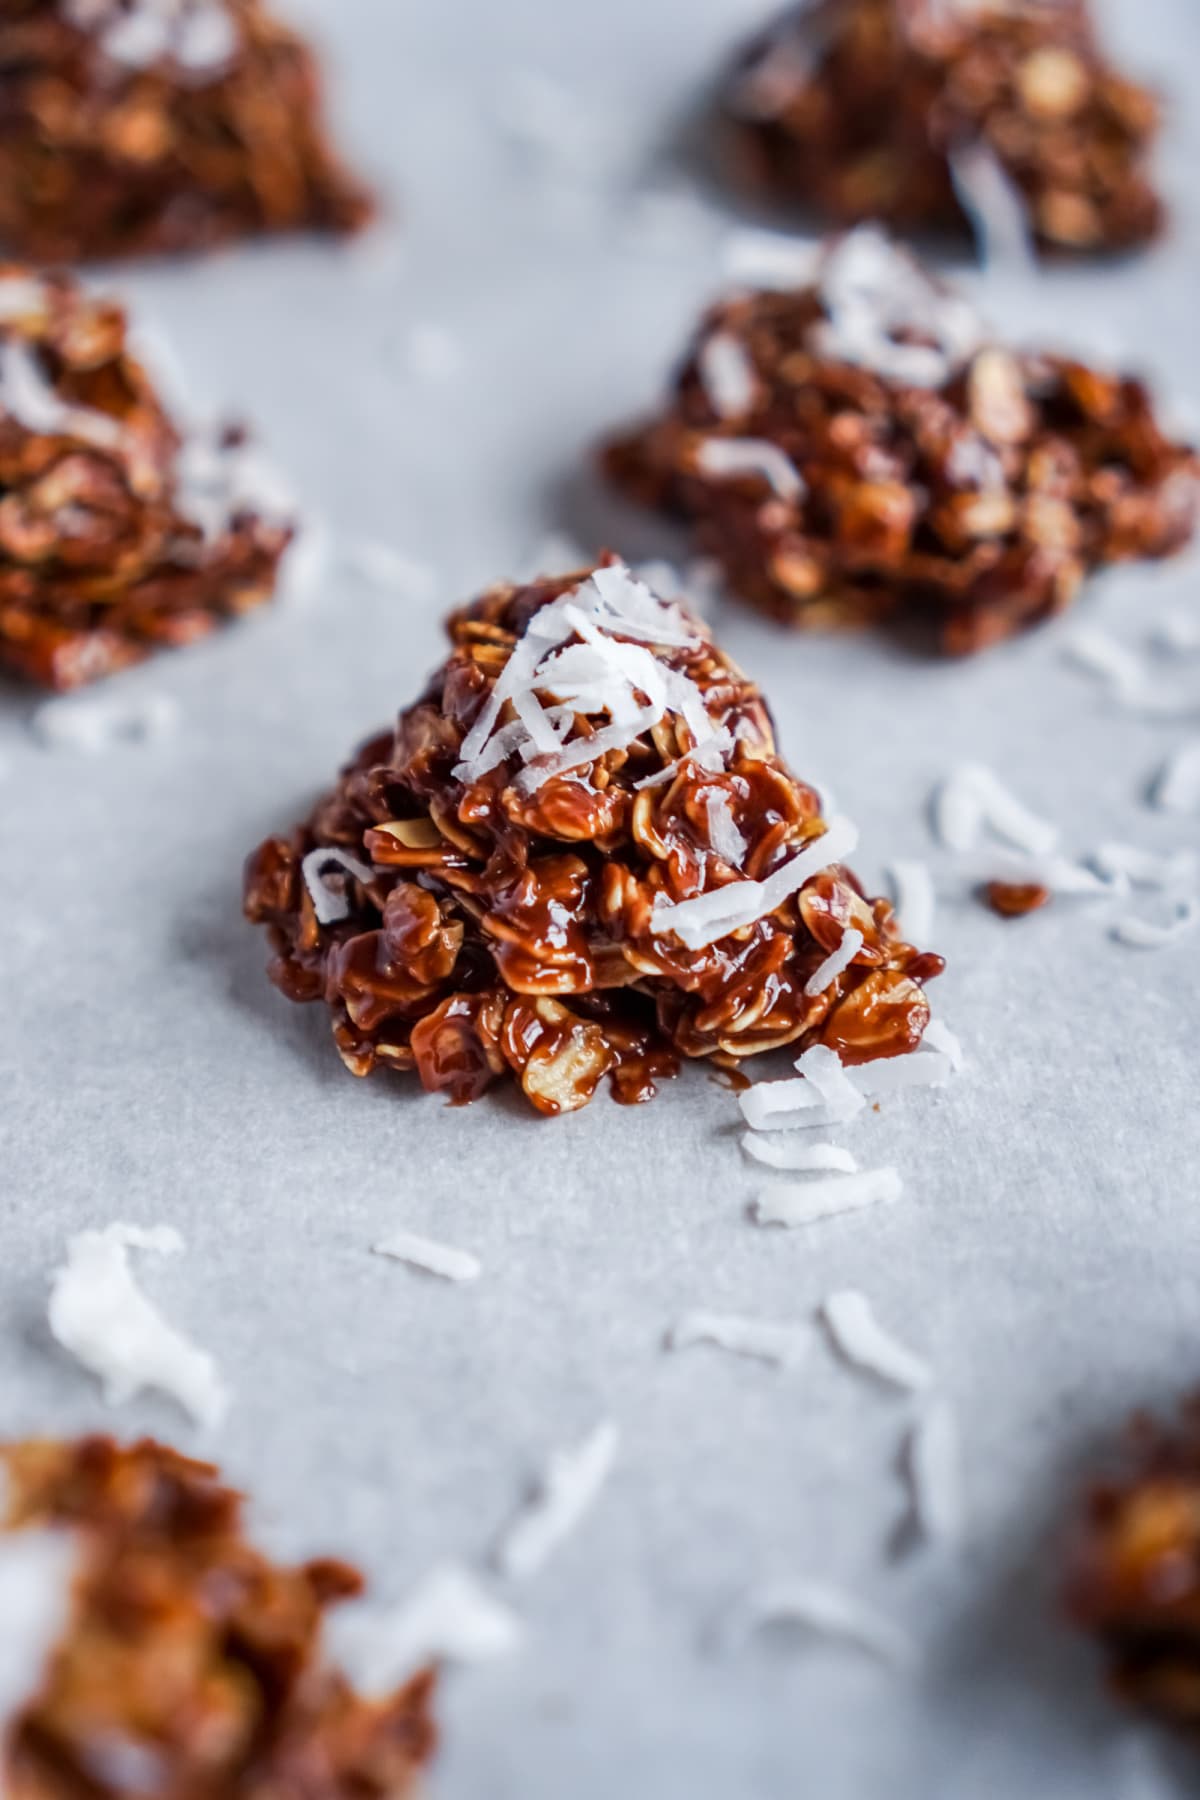 No baked cookies topped with shredded coconut